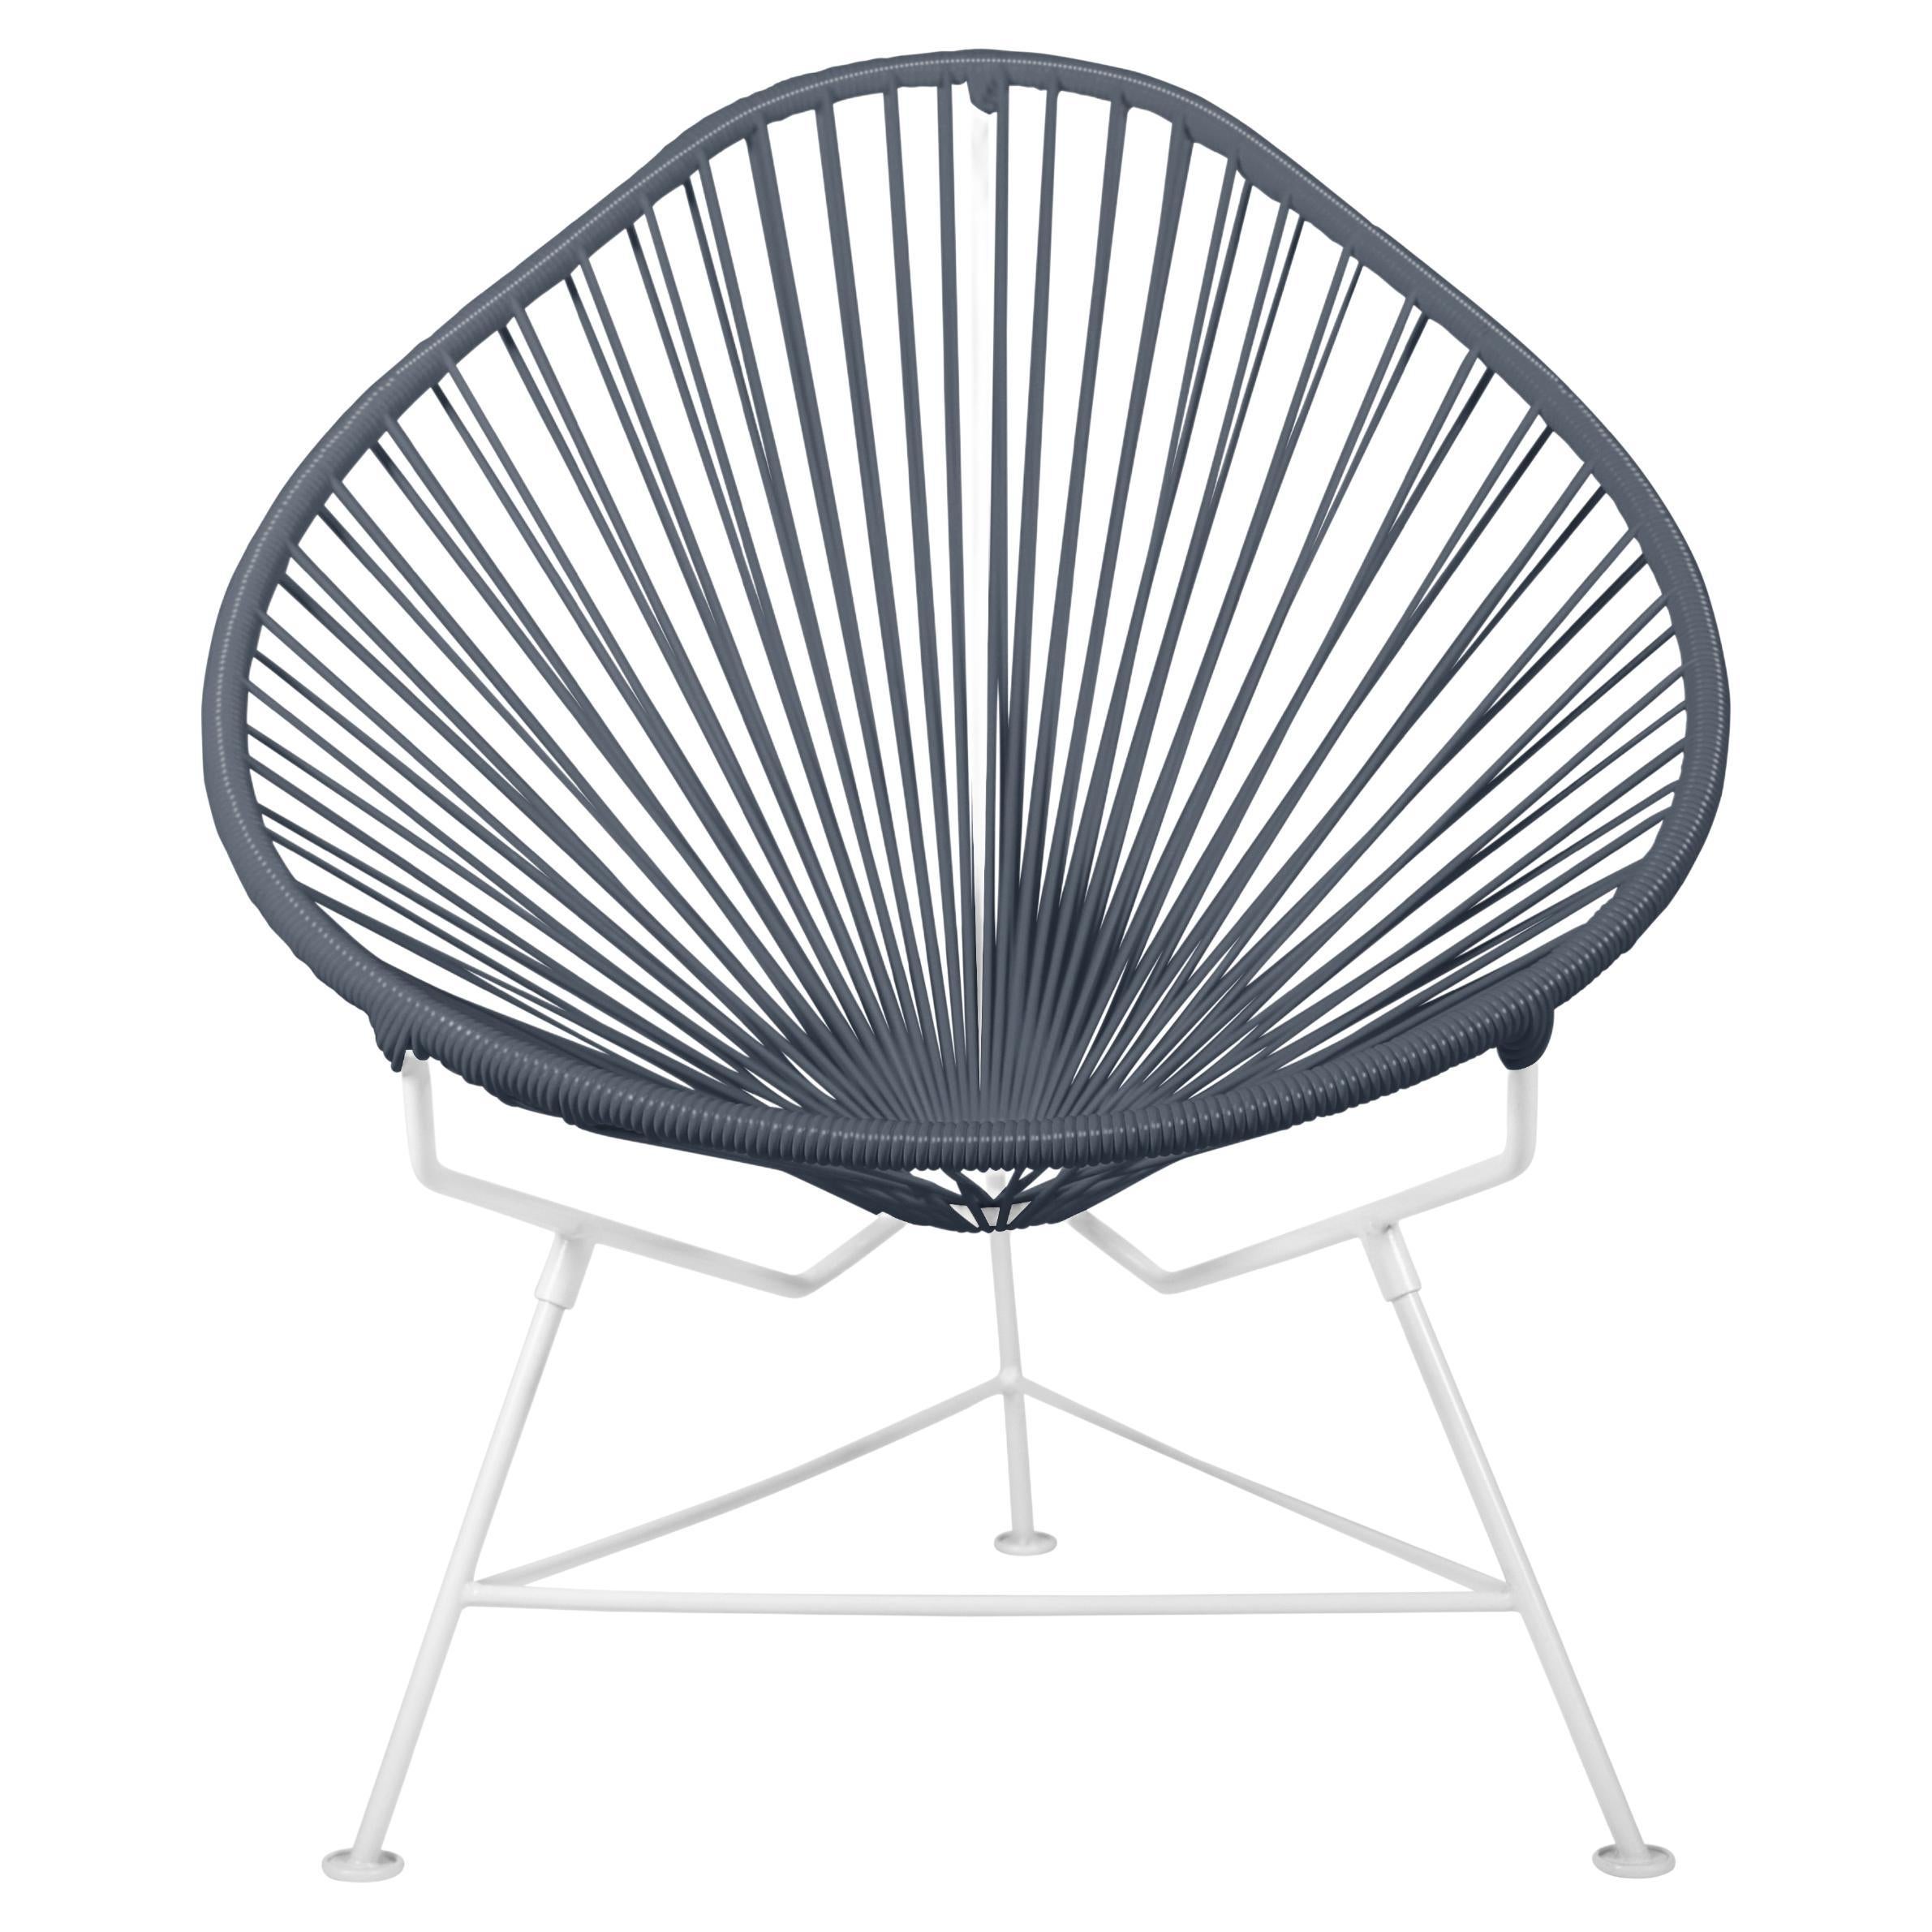 Innit Designs Acapulco Chair Grey Weave on White Frame For Sale